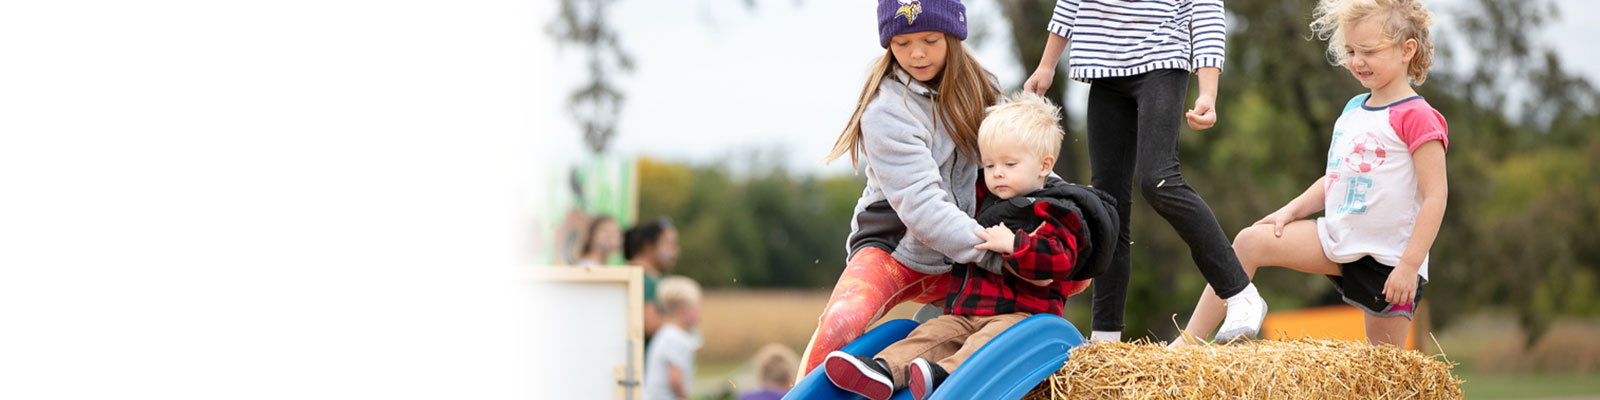 Kids playing at a fall harvest event